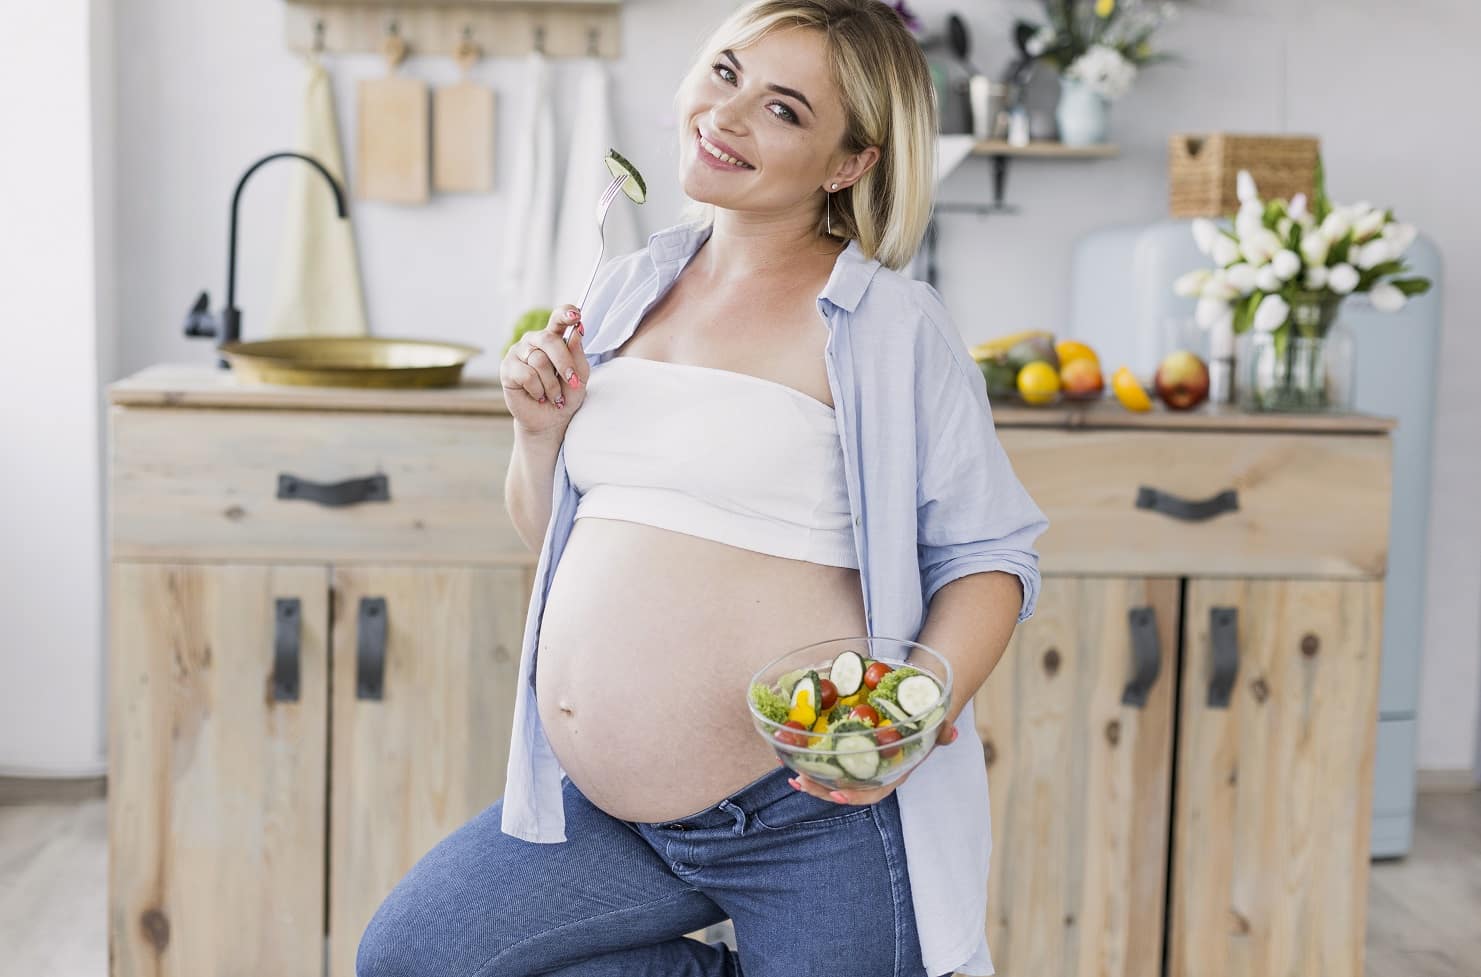 6 Foods To Eat Whiles Pregnant To Make Your Baby Smart